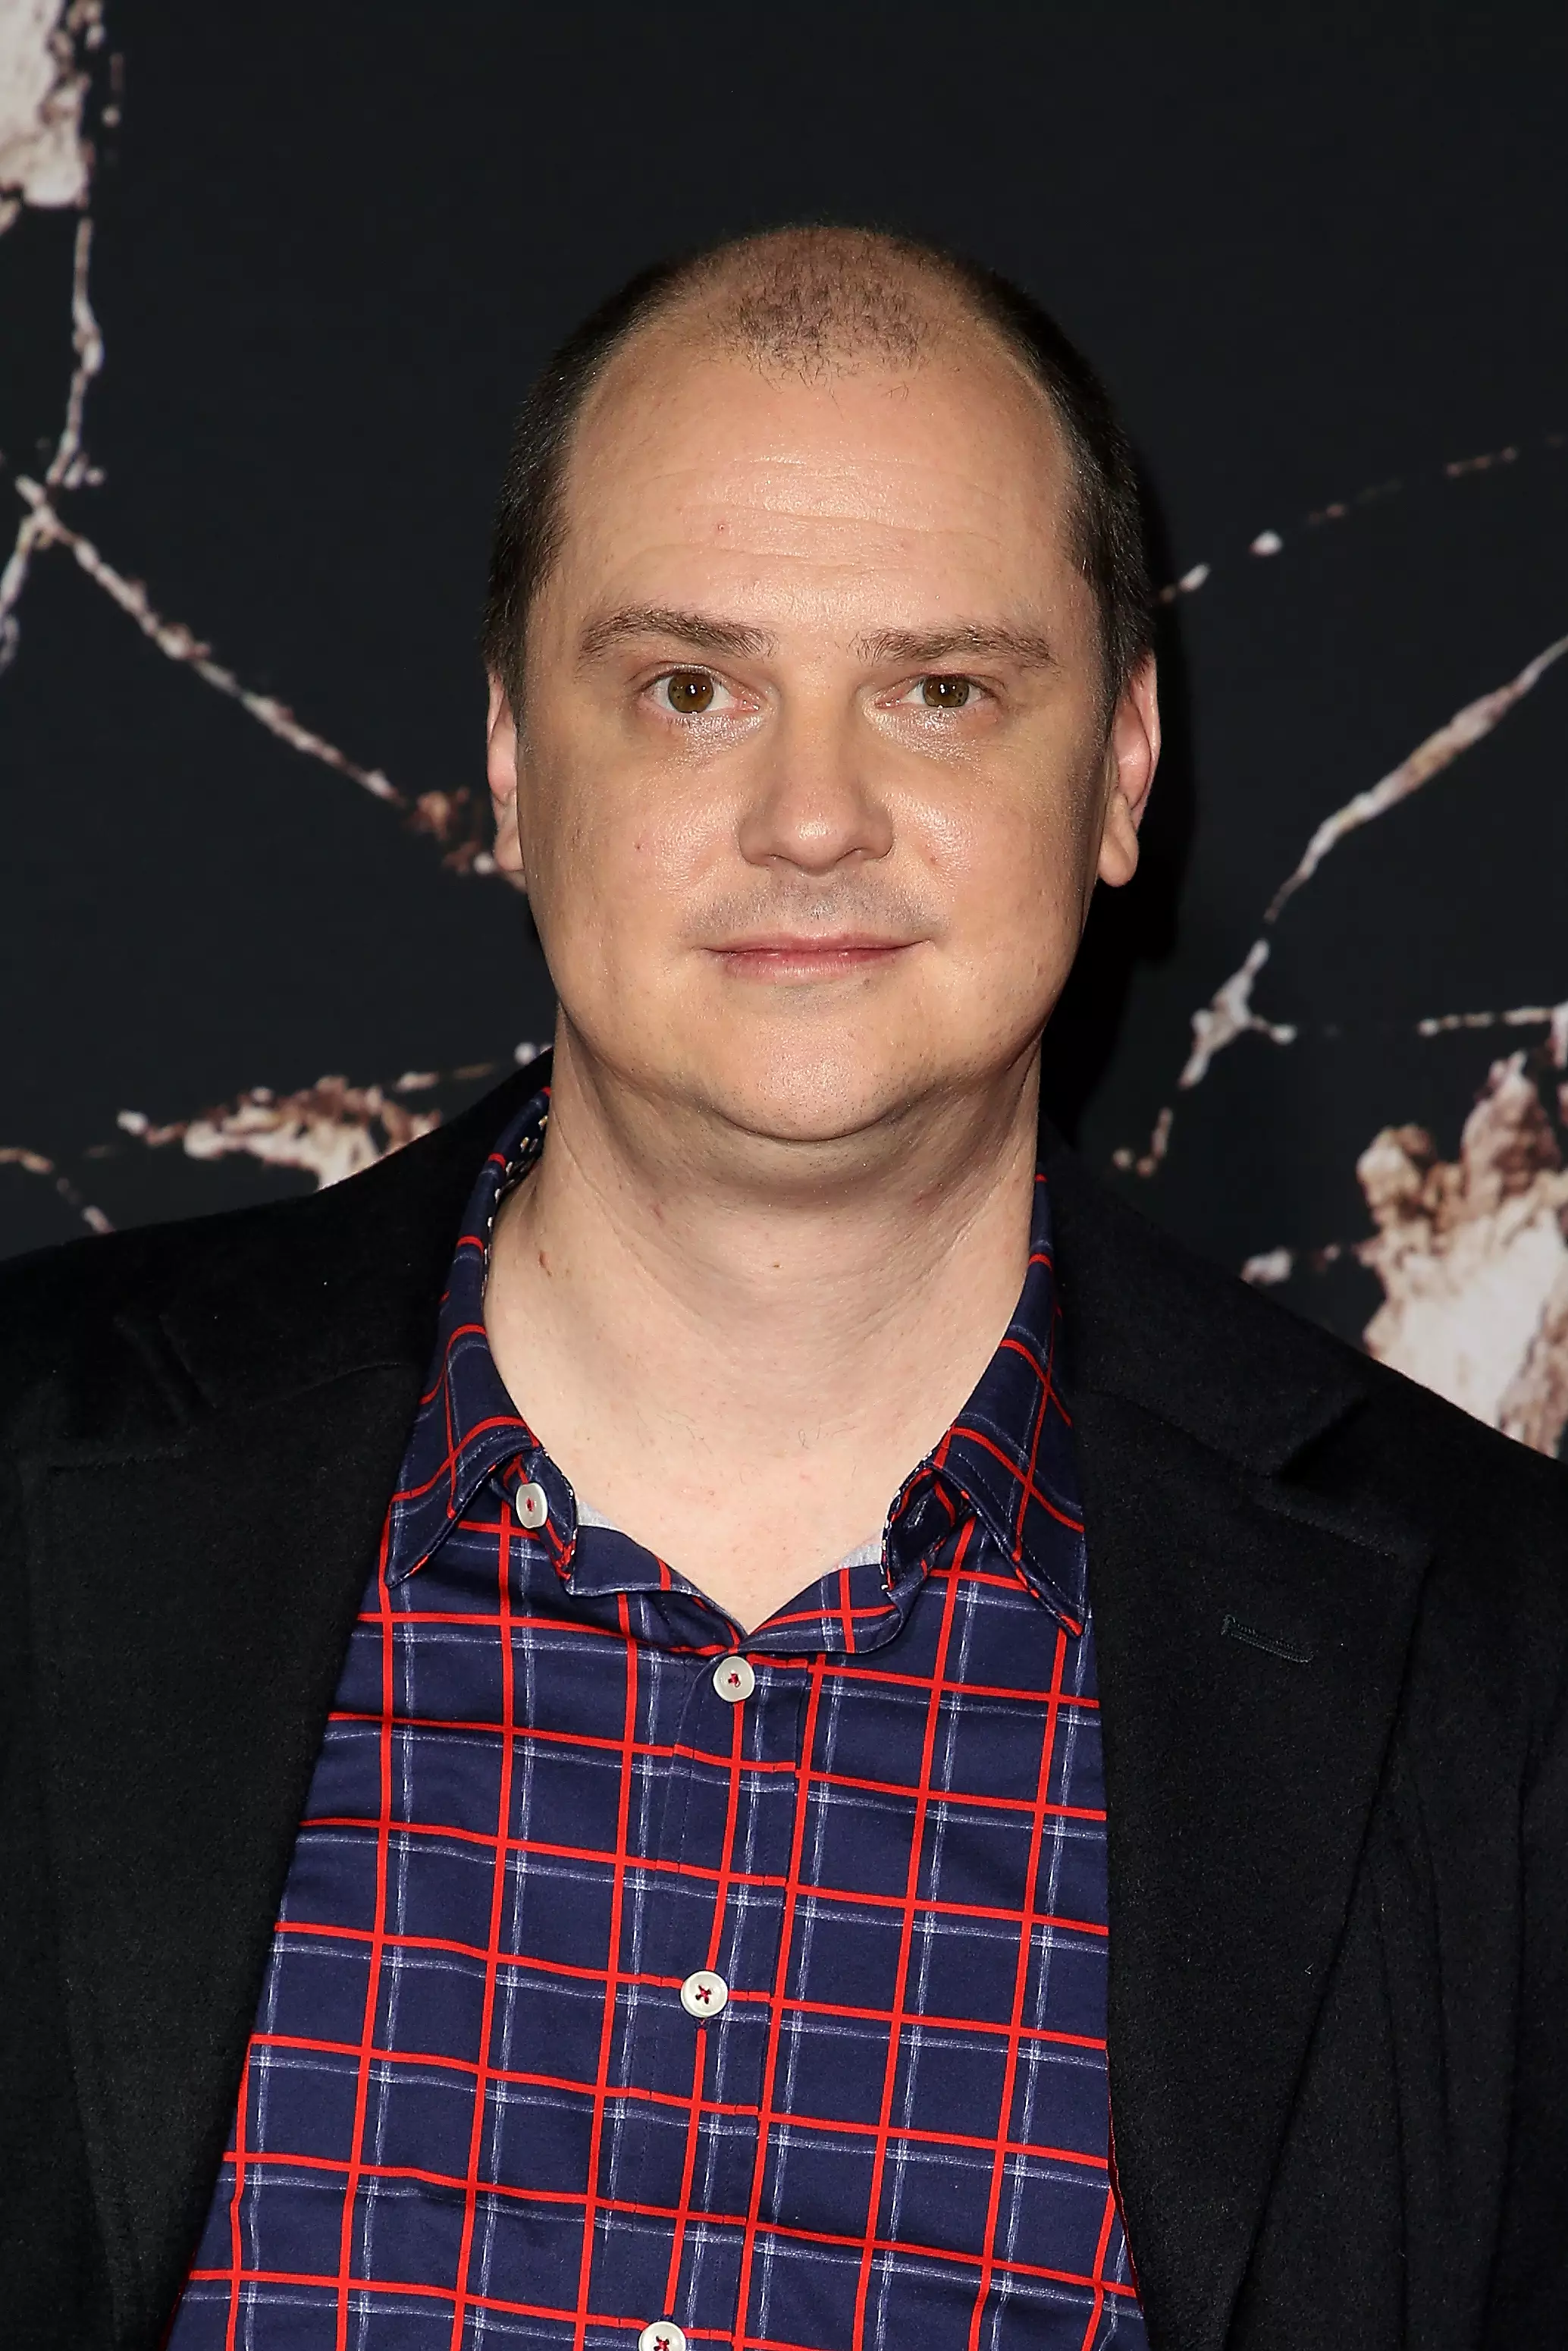 Mike Flanagan said there were no plans for another series in The Haunting anthology.